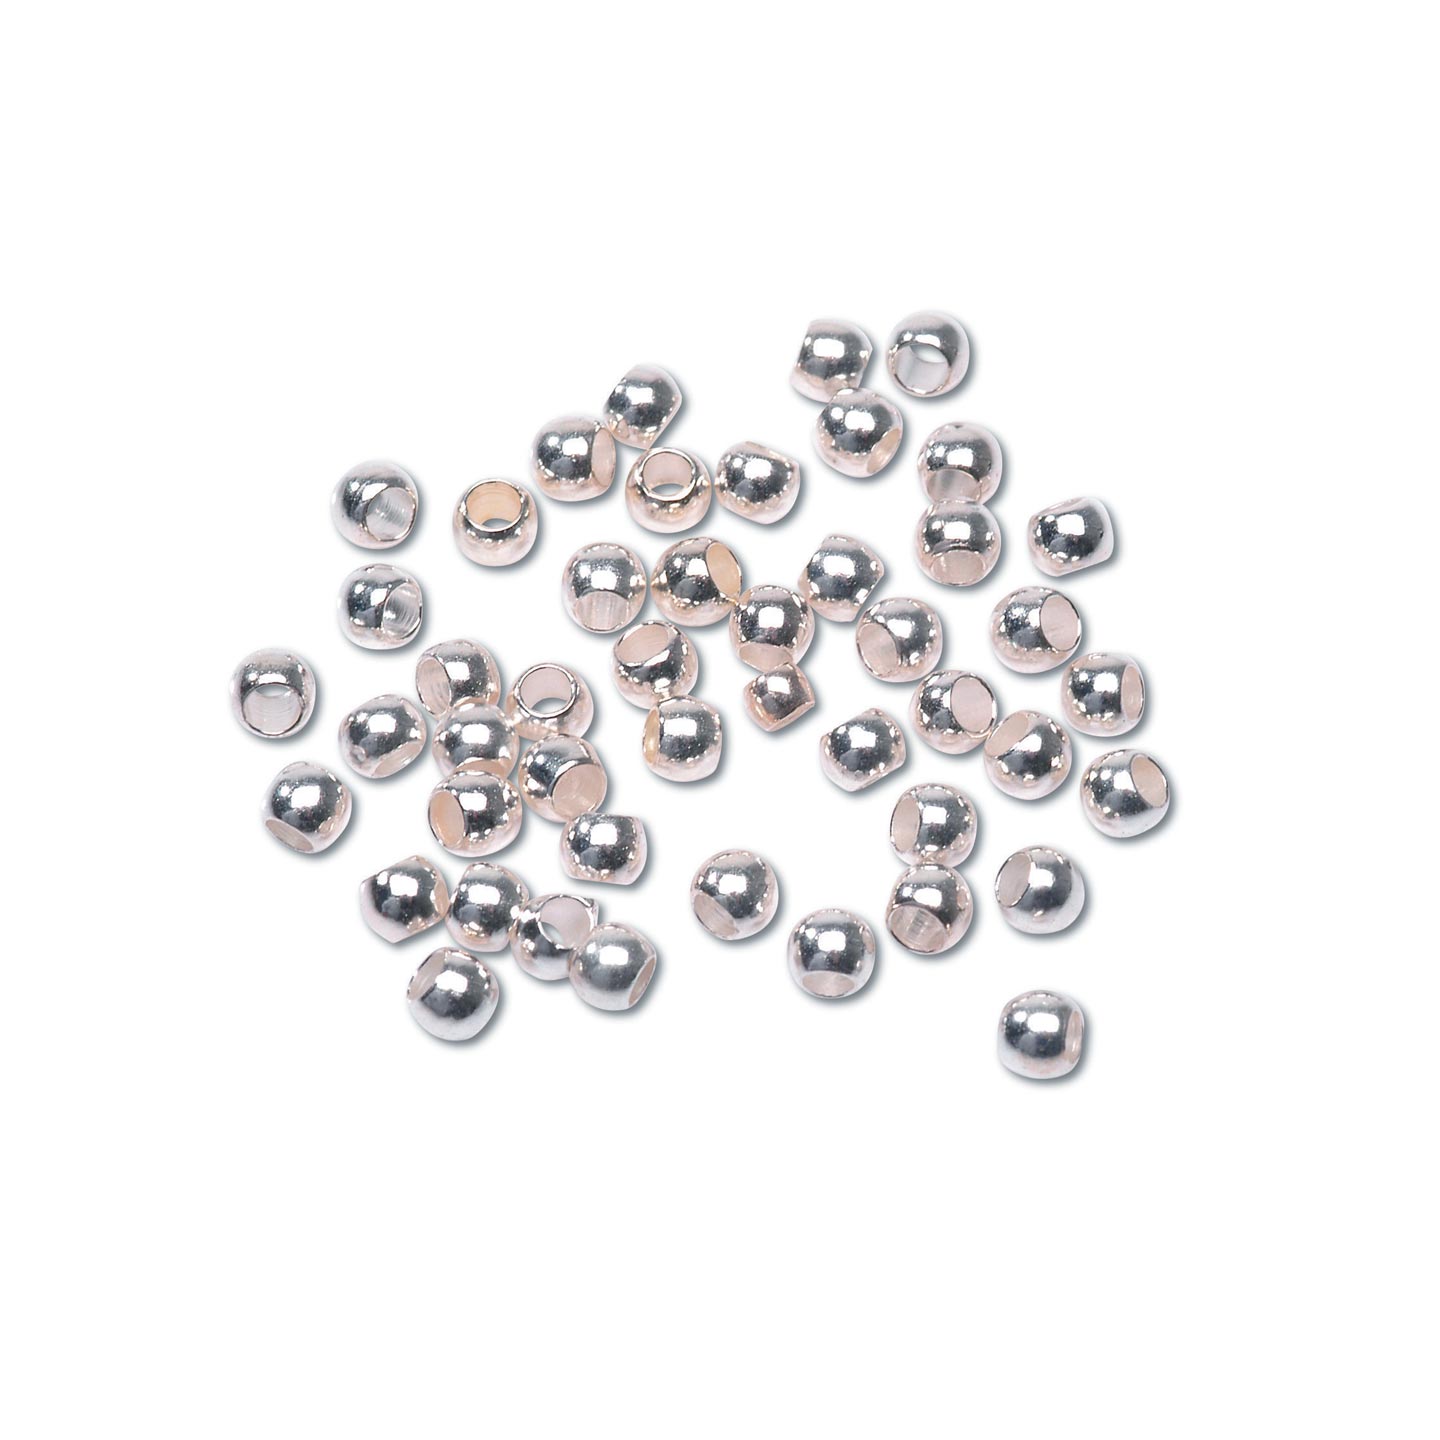 Jewelry Making Supplies - Crimp Beads - Crimping Beads